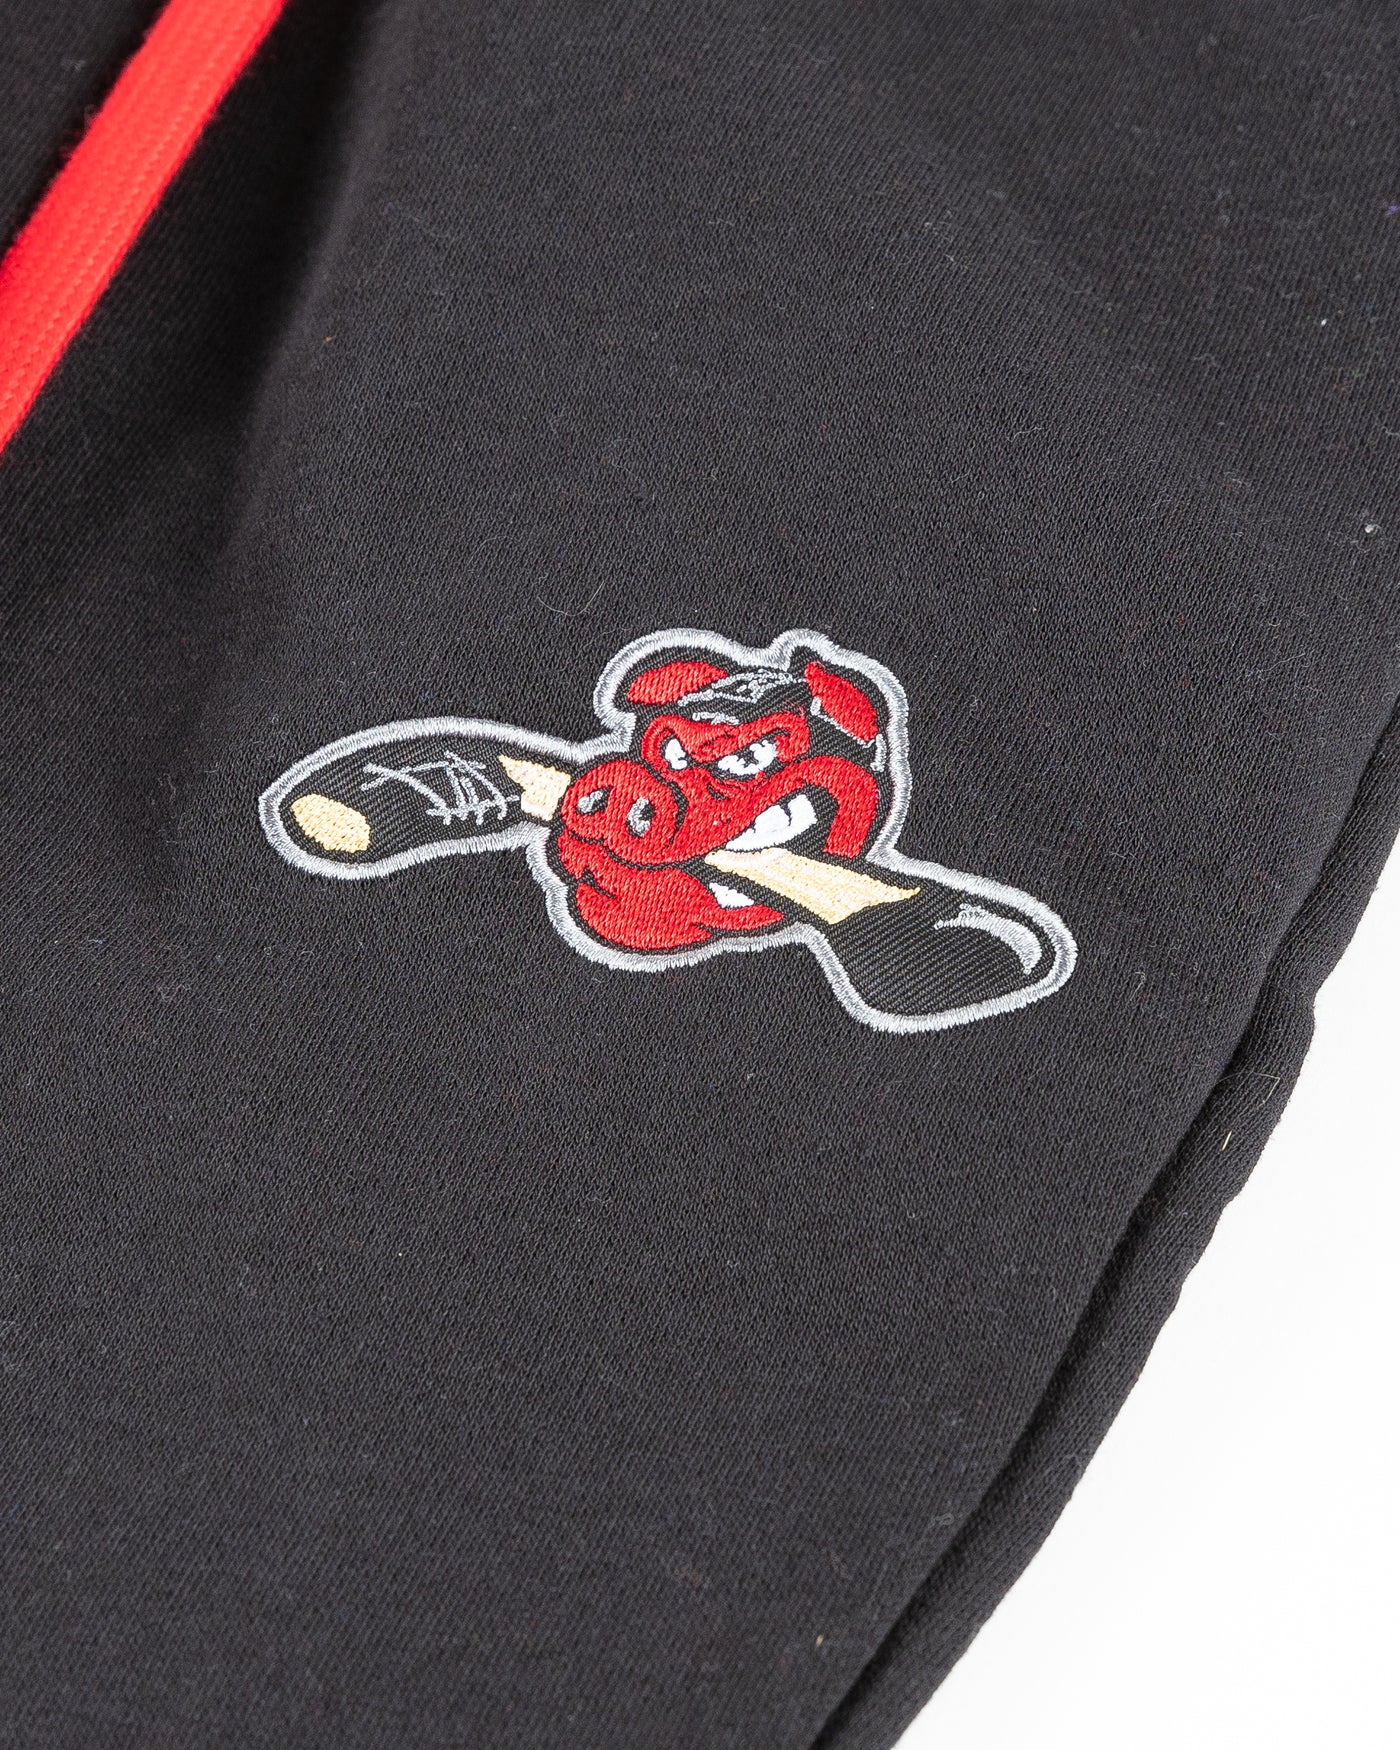 black Rockford IceHogs sweatpants with embroidered Hammy logo on left thigh - detail lay flat